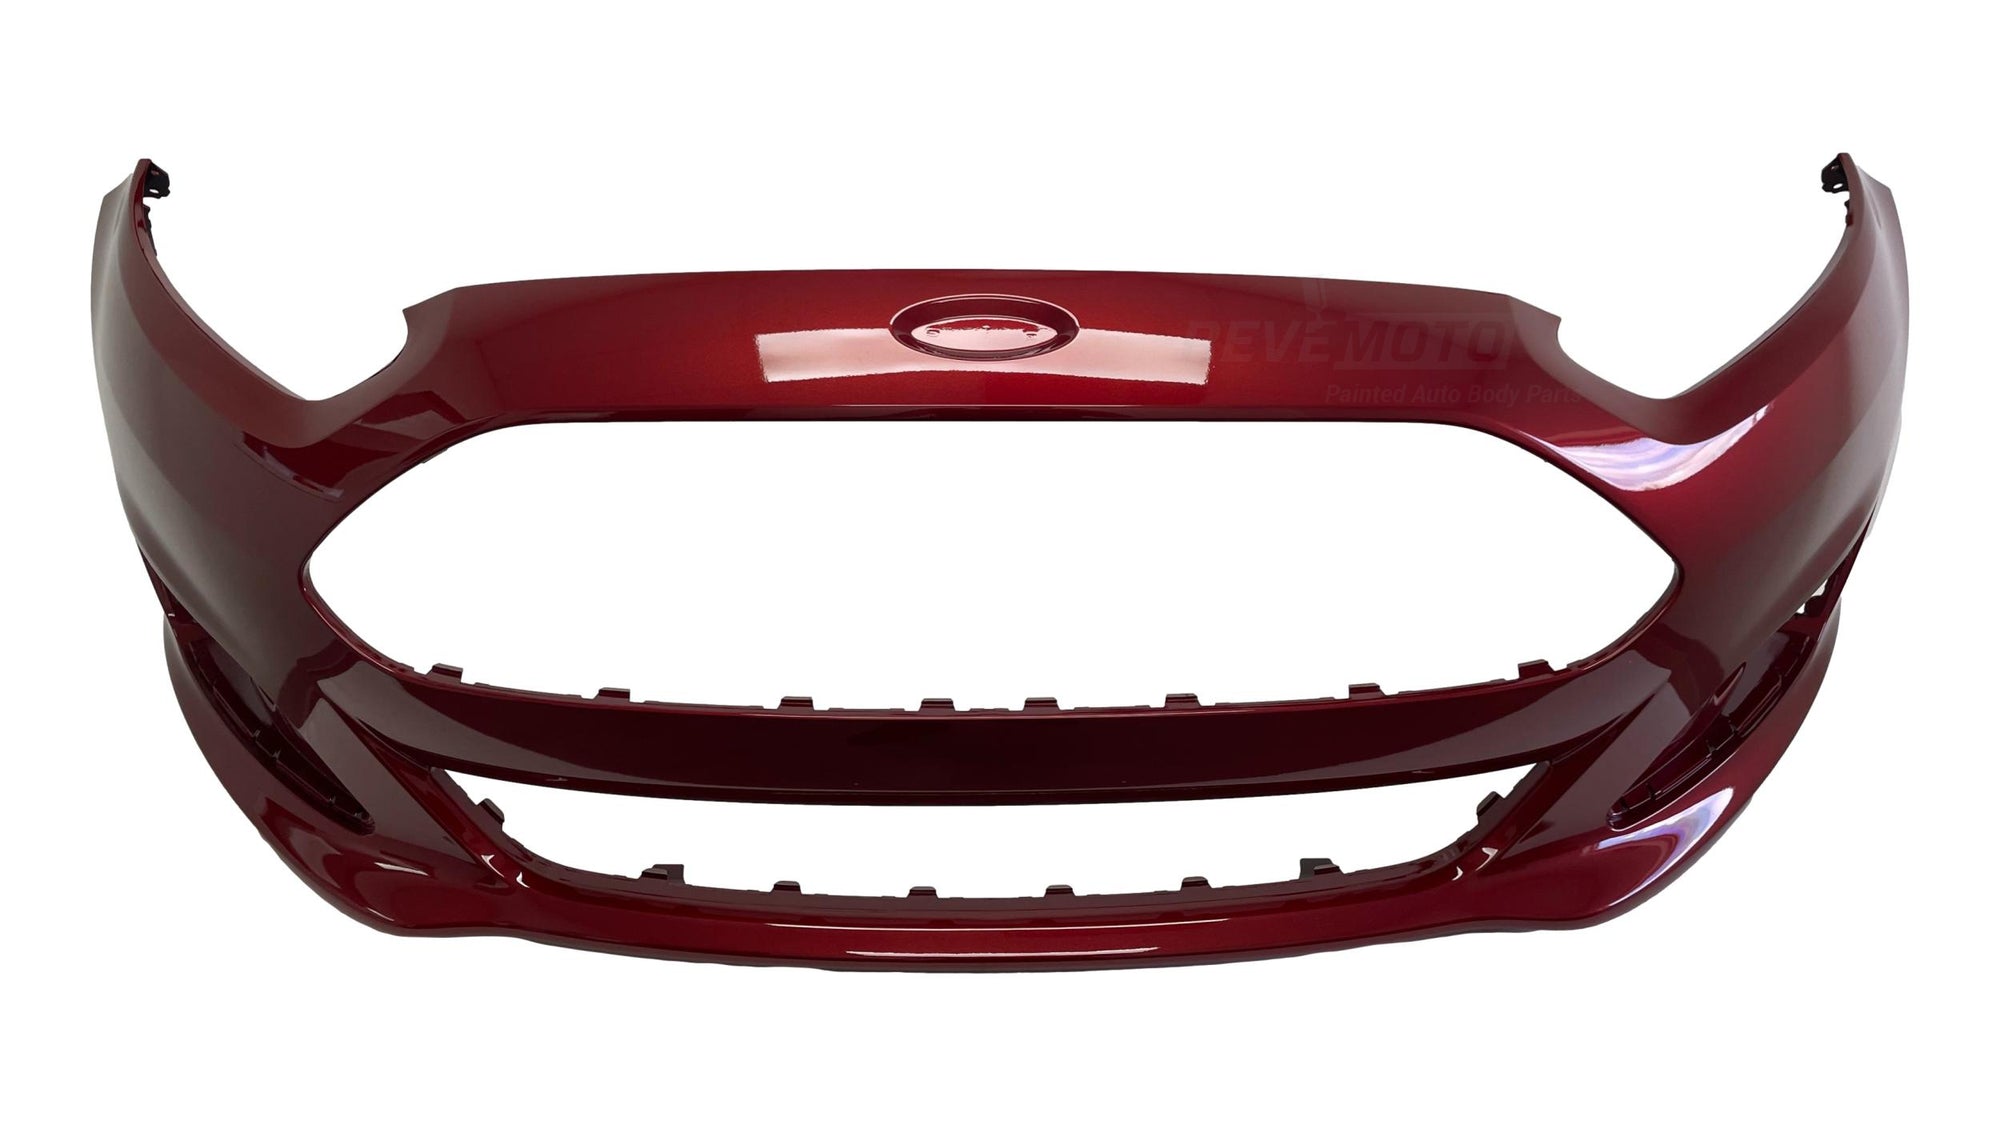 2014-2019 Ford Fiesta Front Bumper Painted Hatchback Sedan WITHOUT Rocker Molding Kit Ruby Red Metallic (RR) D2BZ17757AB FO1000693